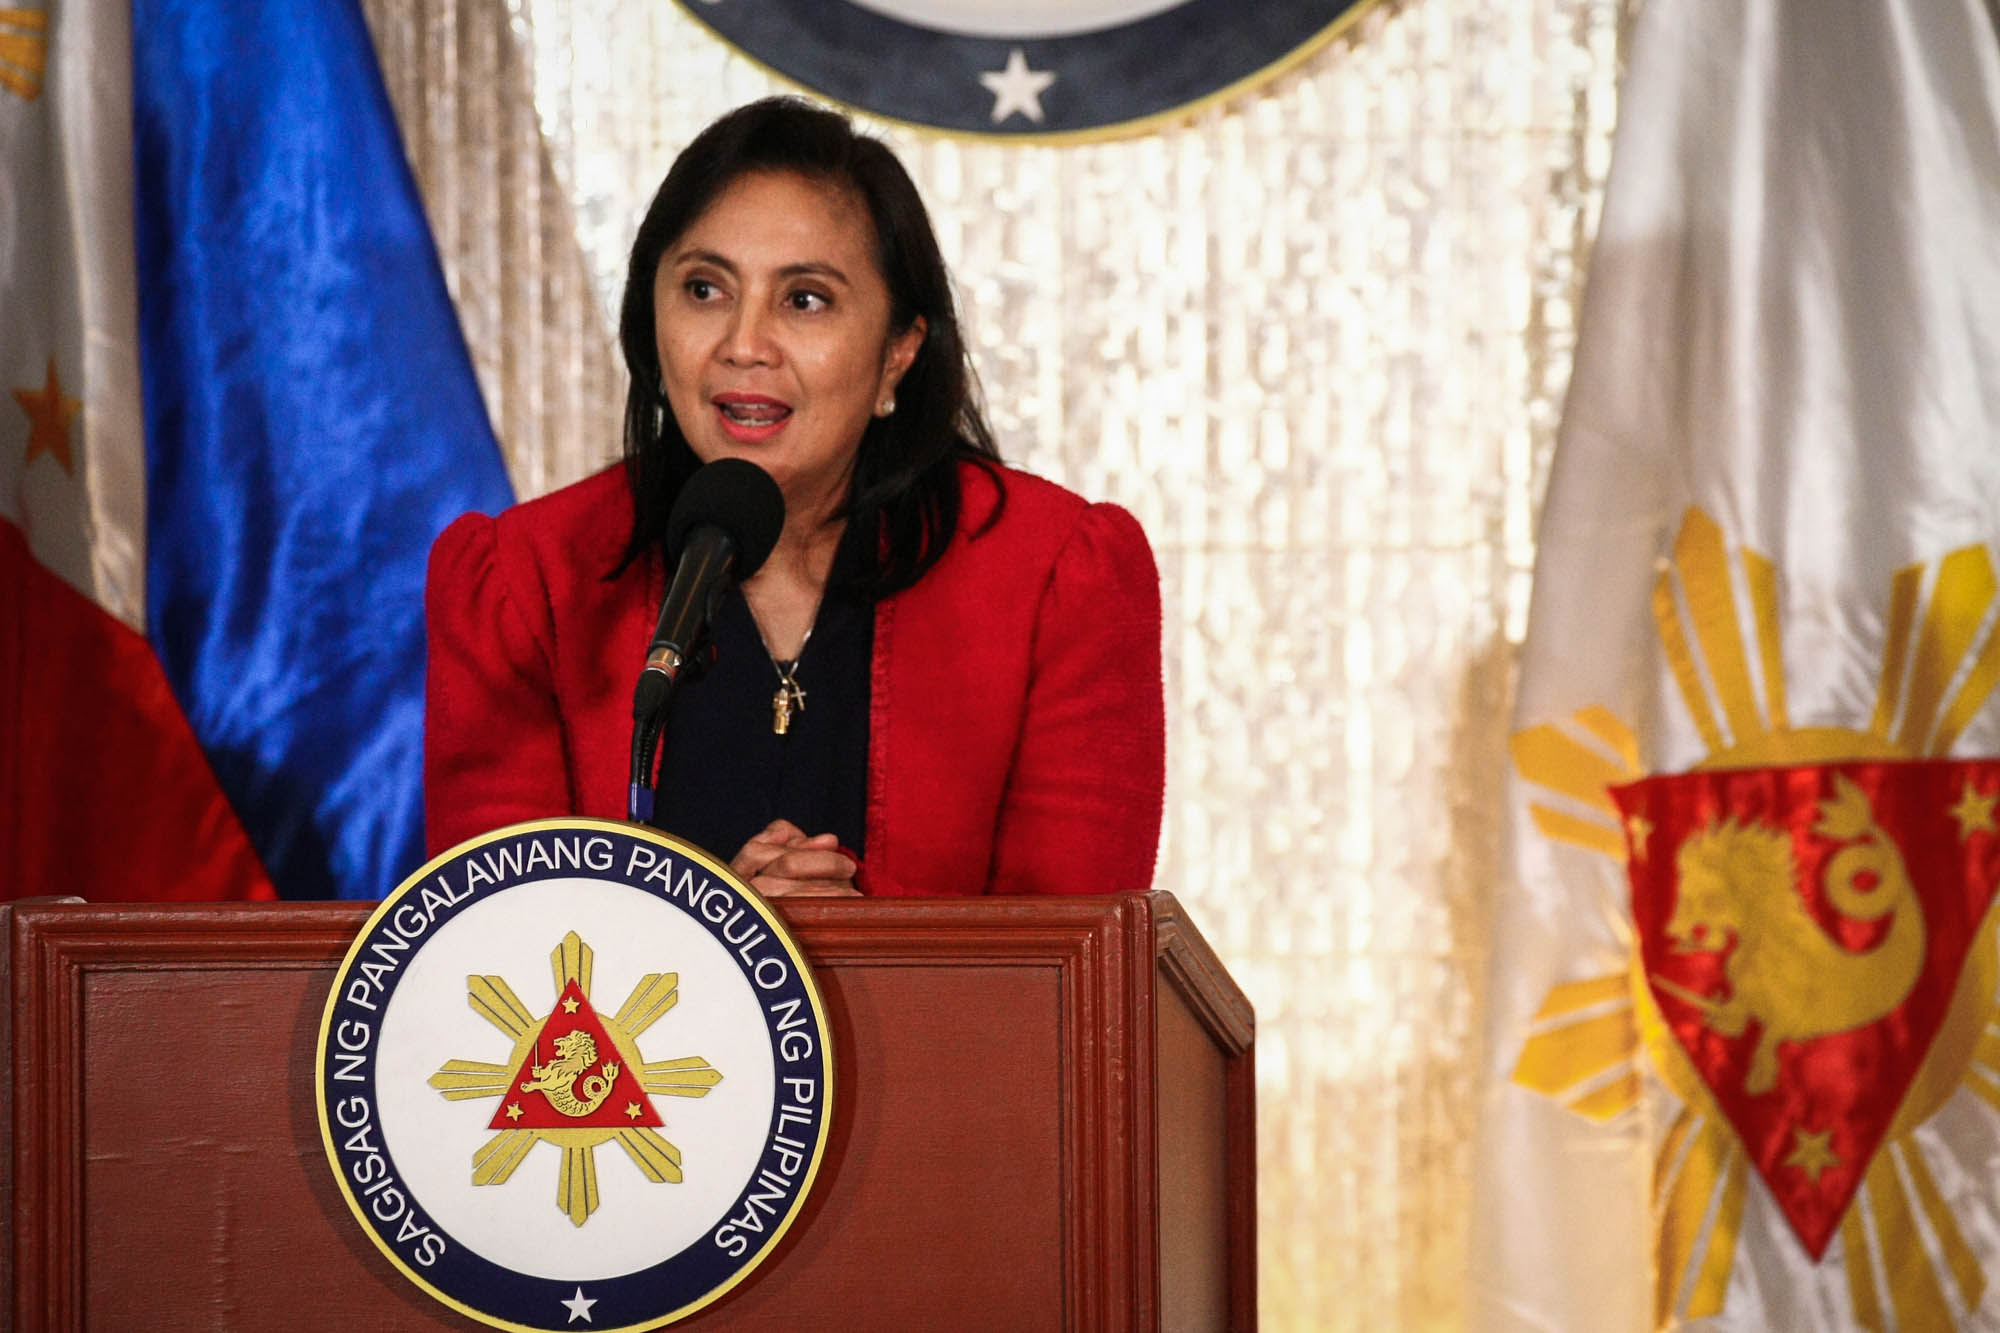 NEW ROLE. Vice President Leni Robredo is formally offered a new role in the Duterte administration. Photo by Jire Carreon/Rappler 